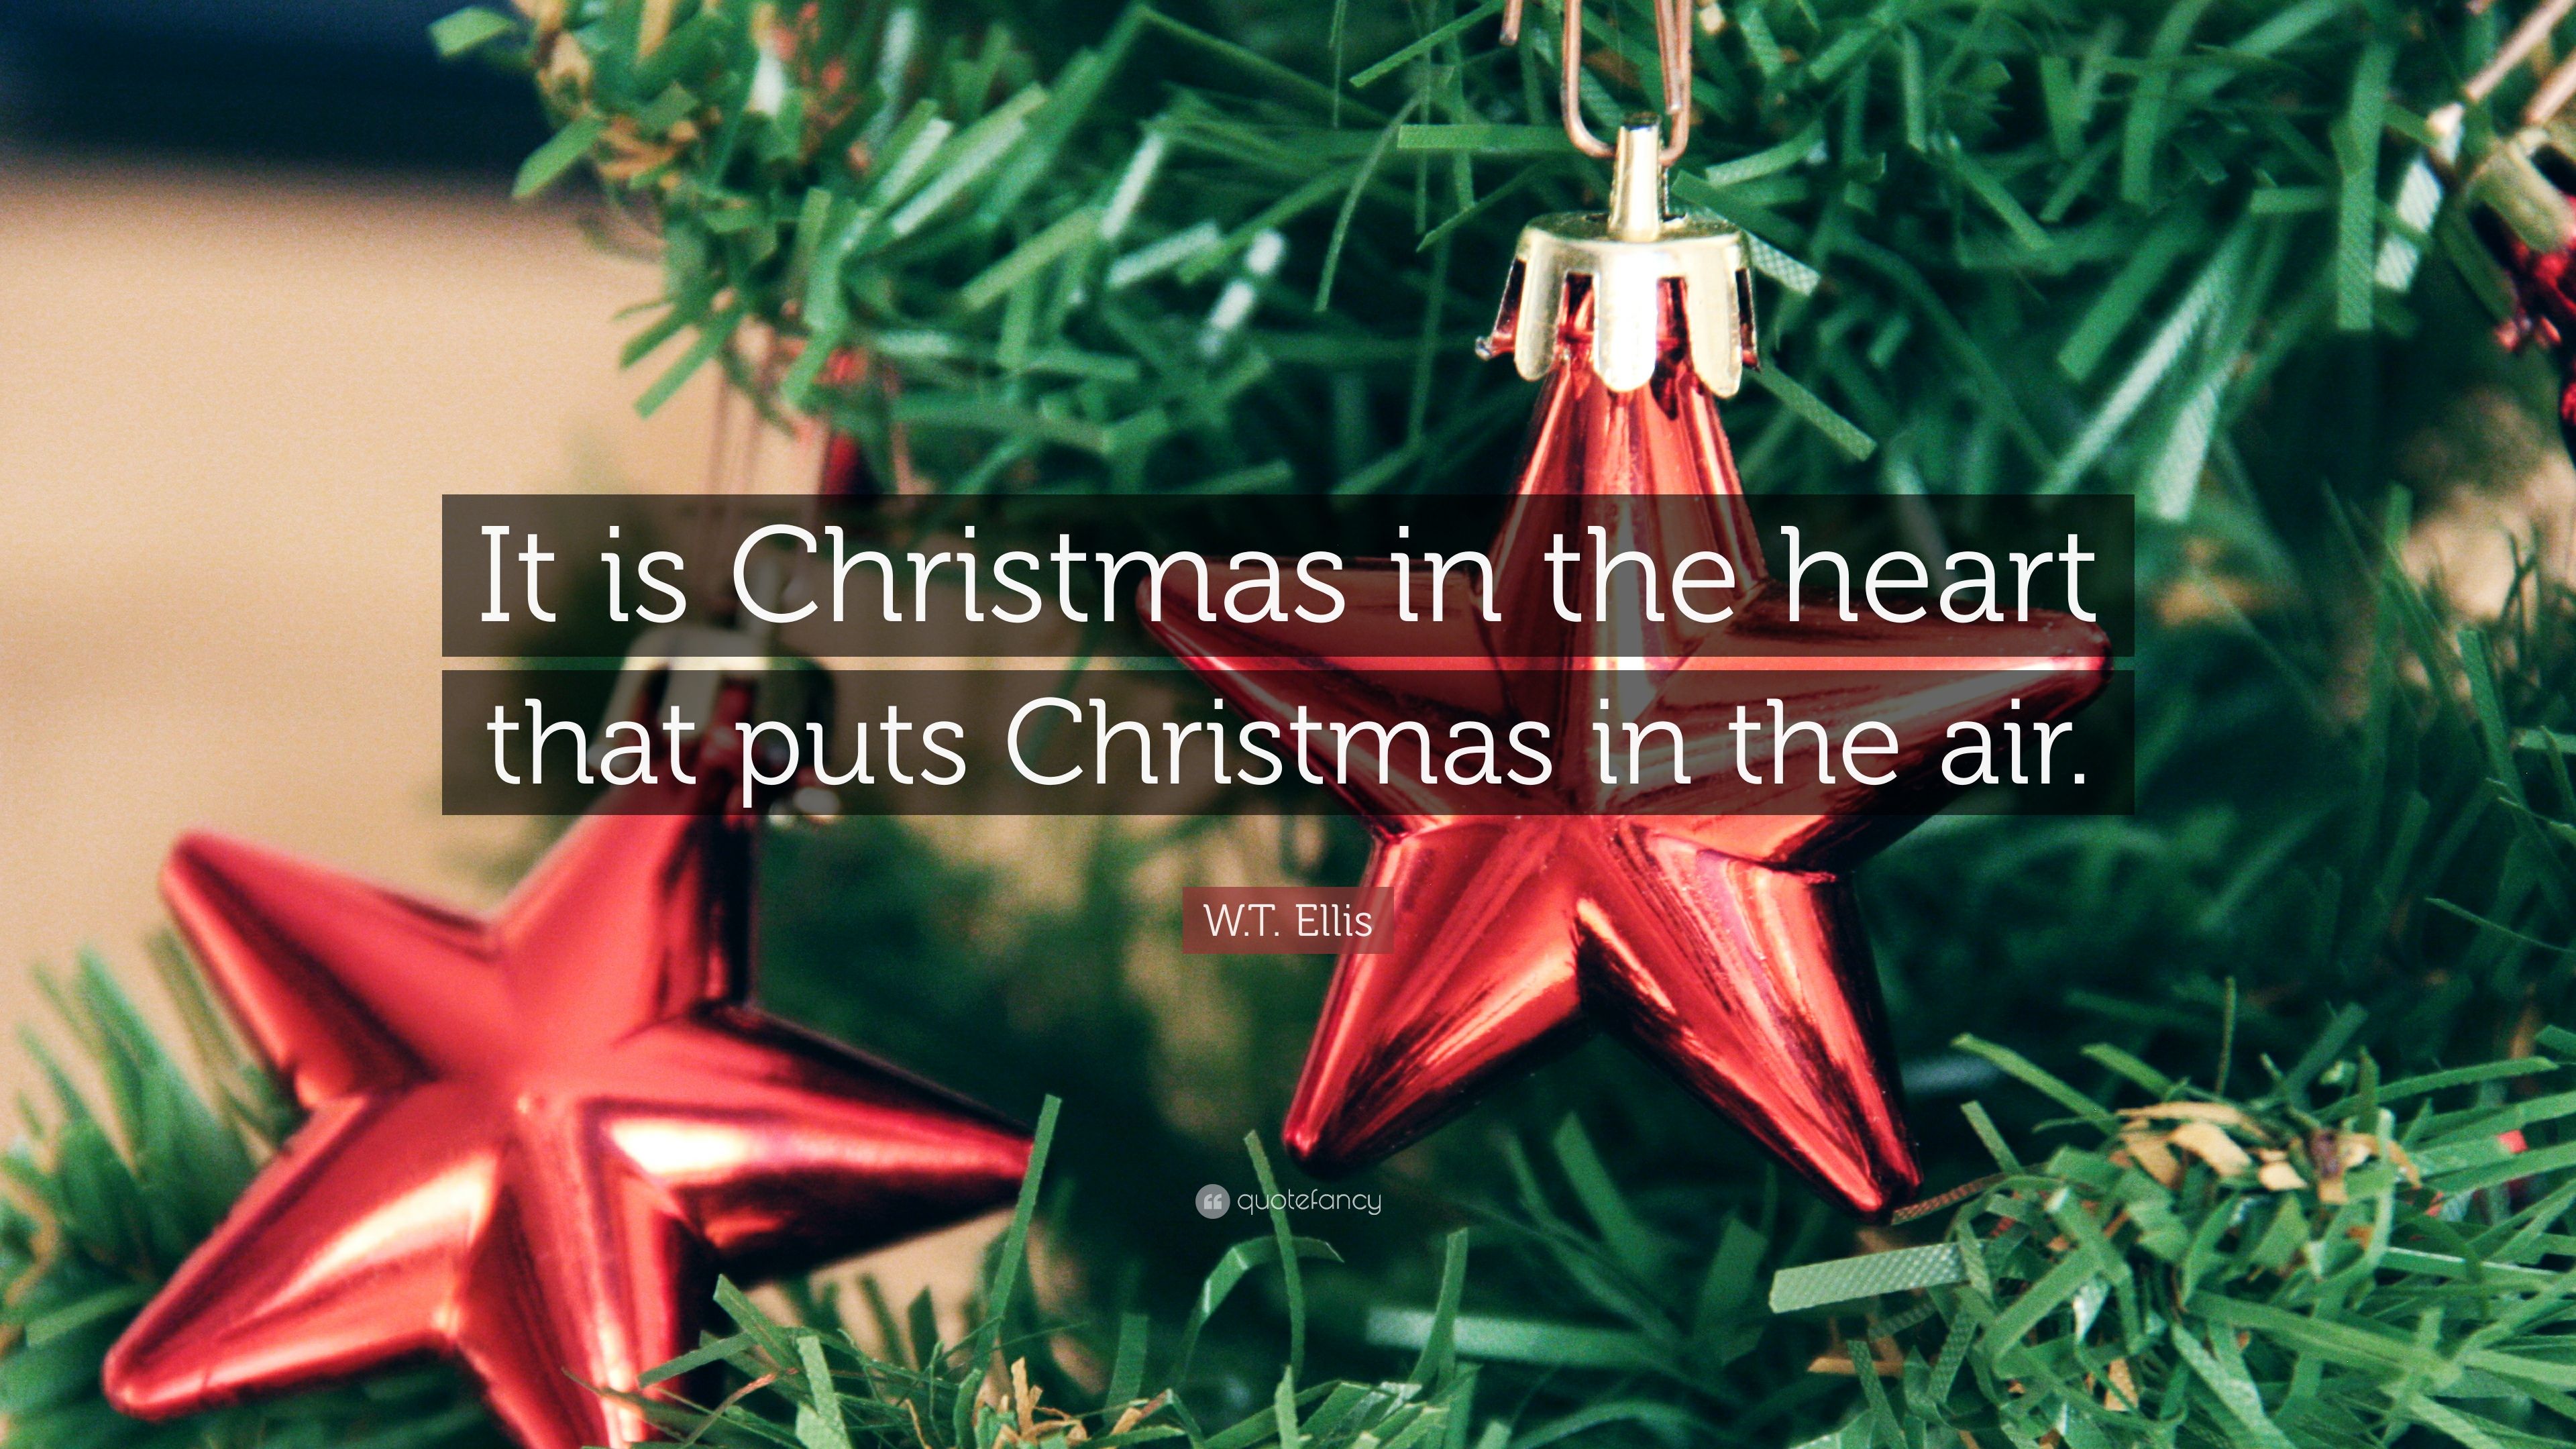 W.T. Ellis Quote: “It is Christmas in the heart that puts Christmas in the air.” (17 wallpaper)